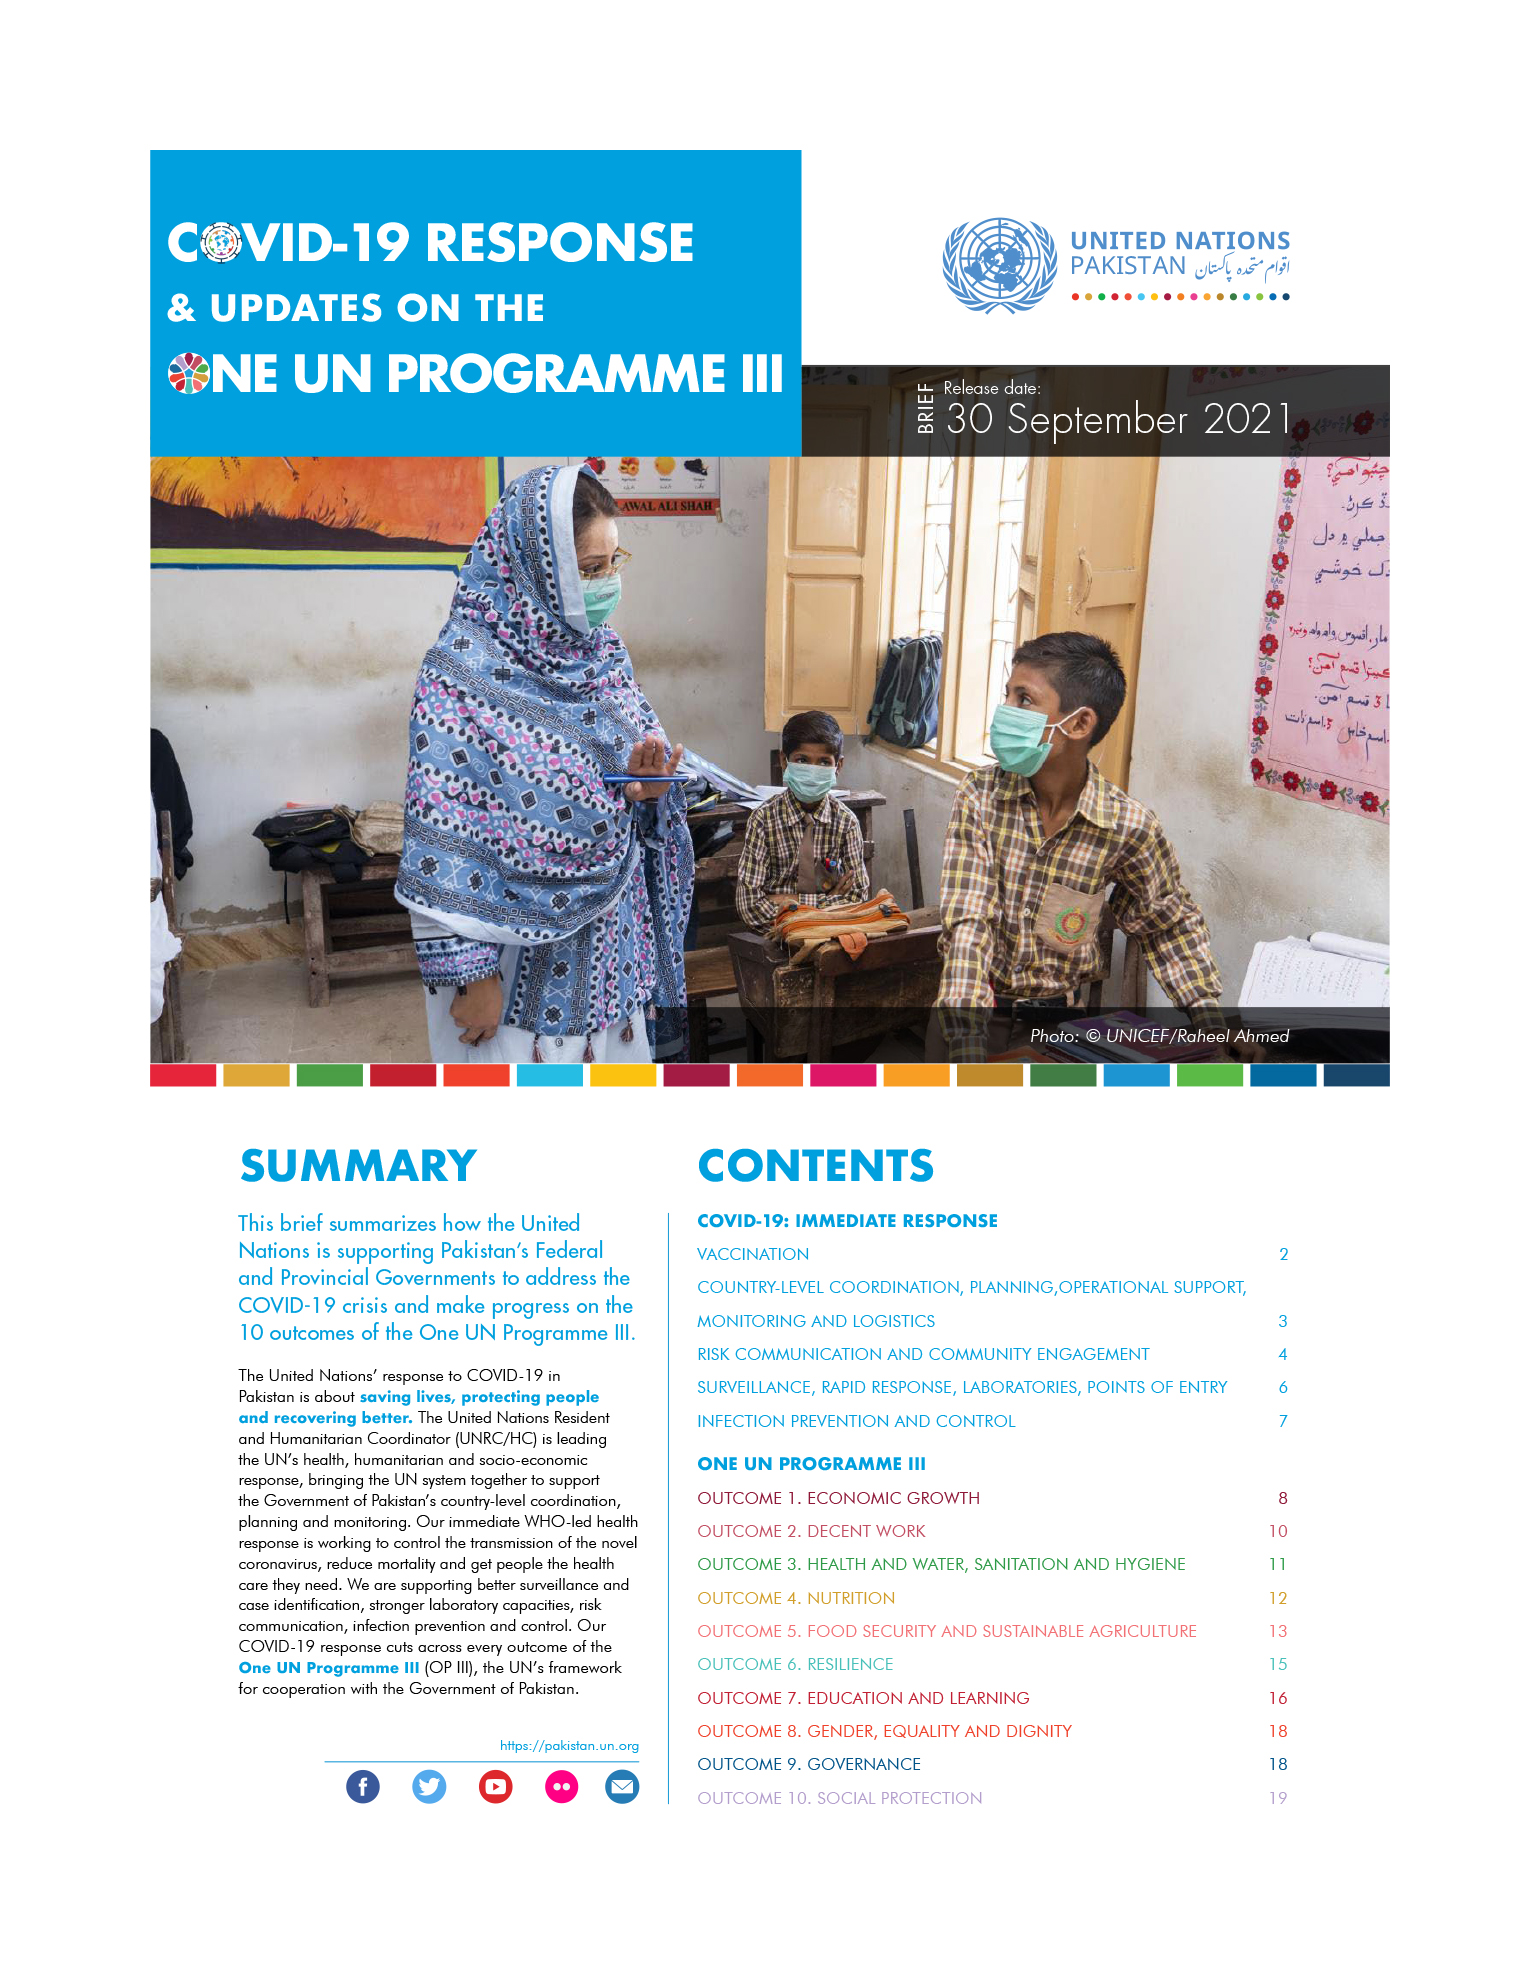 COVID-19 RESPONSE & UPDATES ON THE ONE UN PROGRAMME III - September 2021